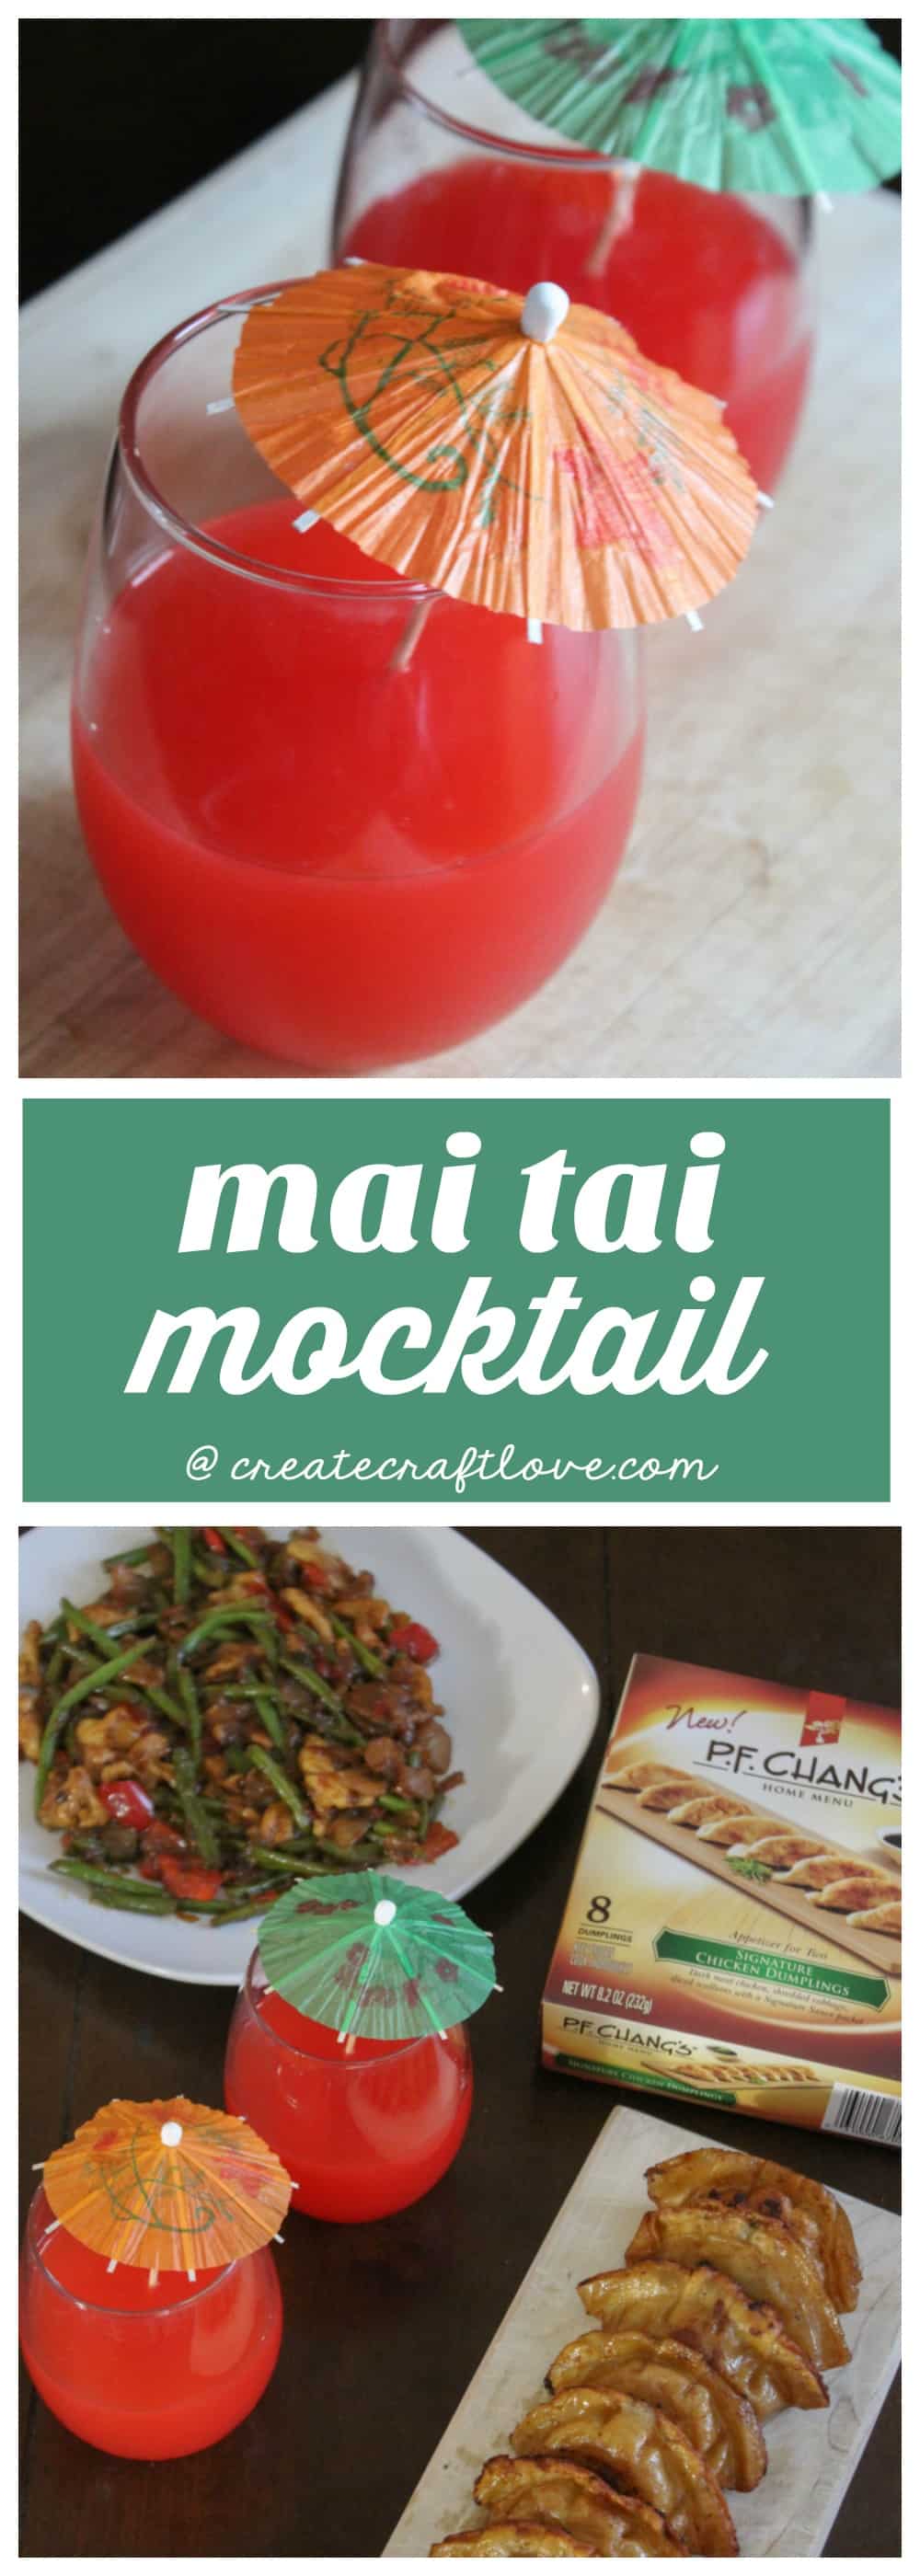 Pair this delicious Mai Tai Mocktail with dumplings and stir fry for an easy weeknight dinner! #sponsored #wokwednesday